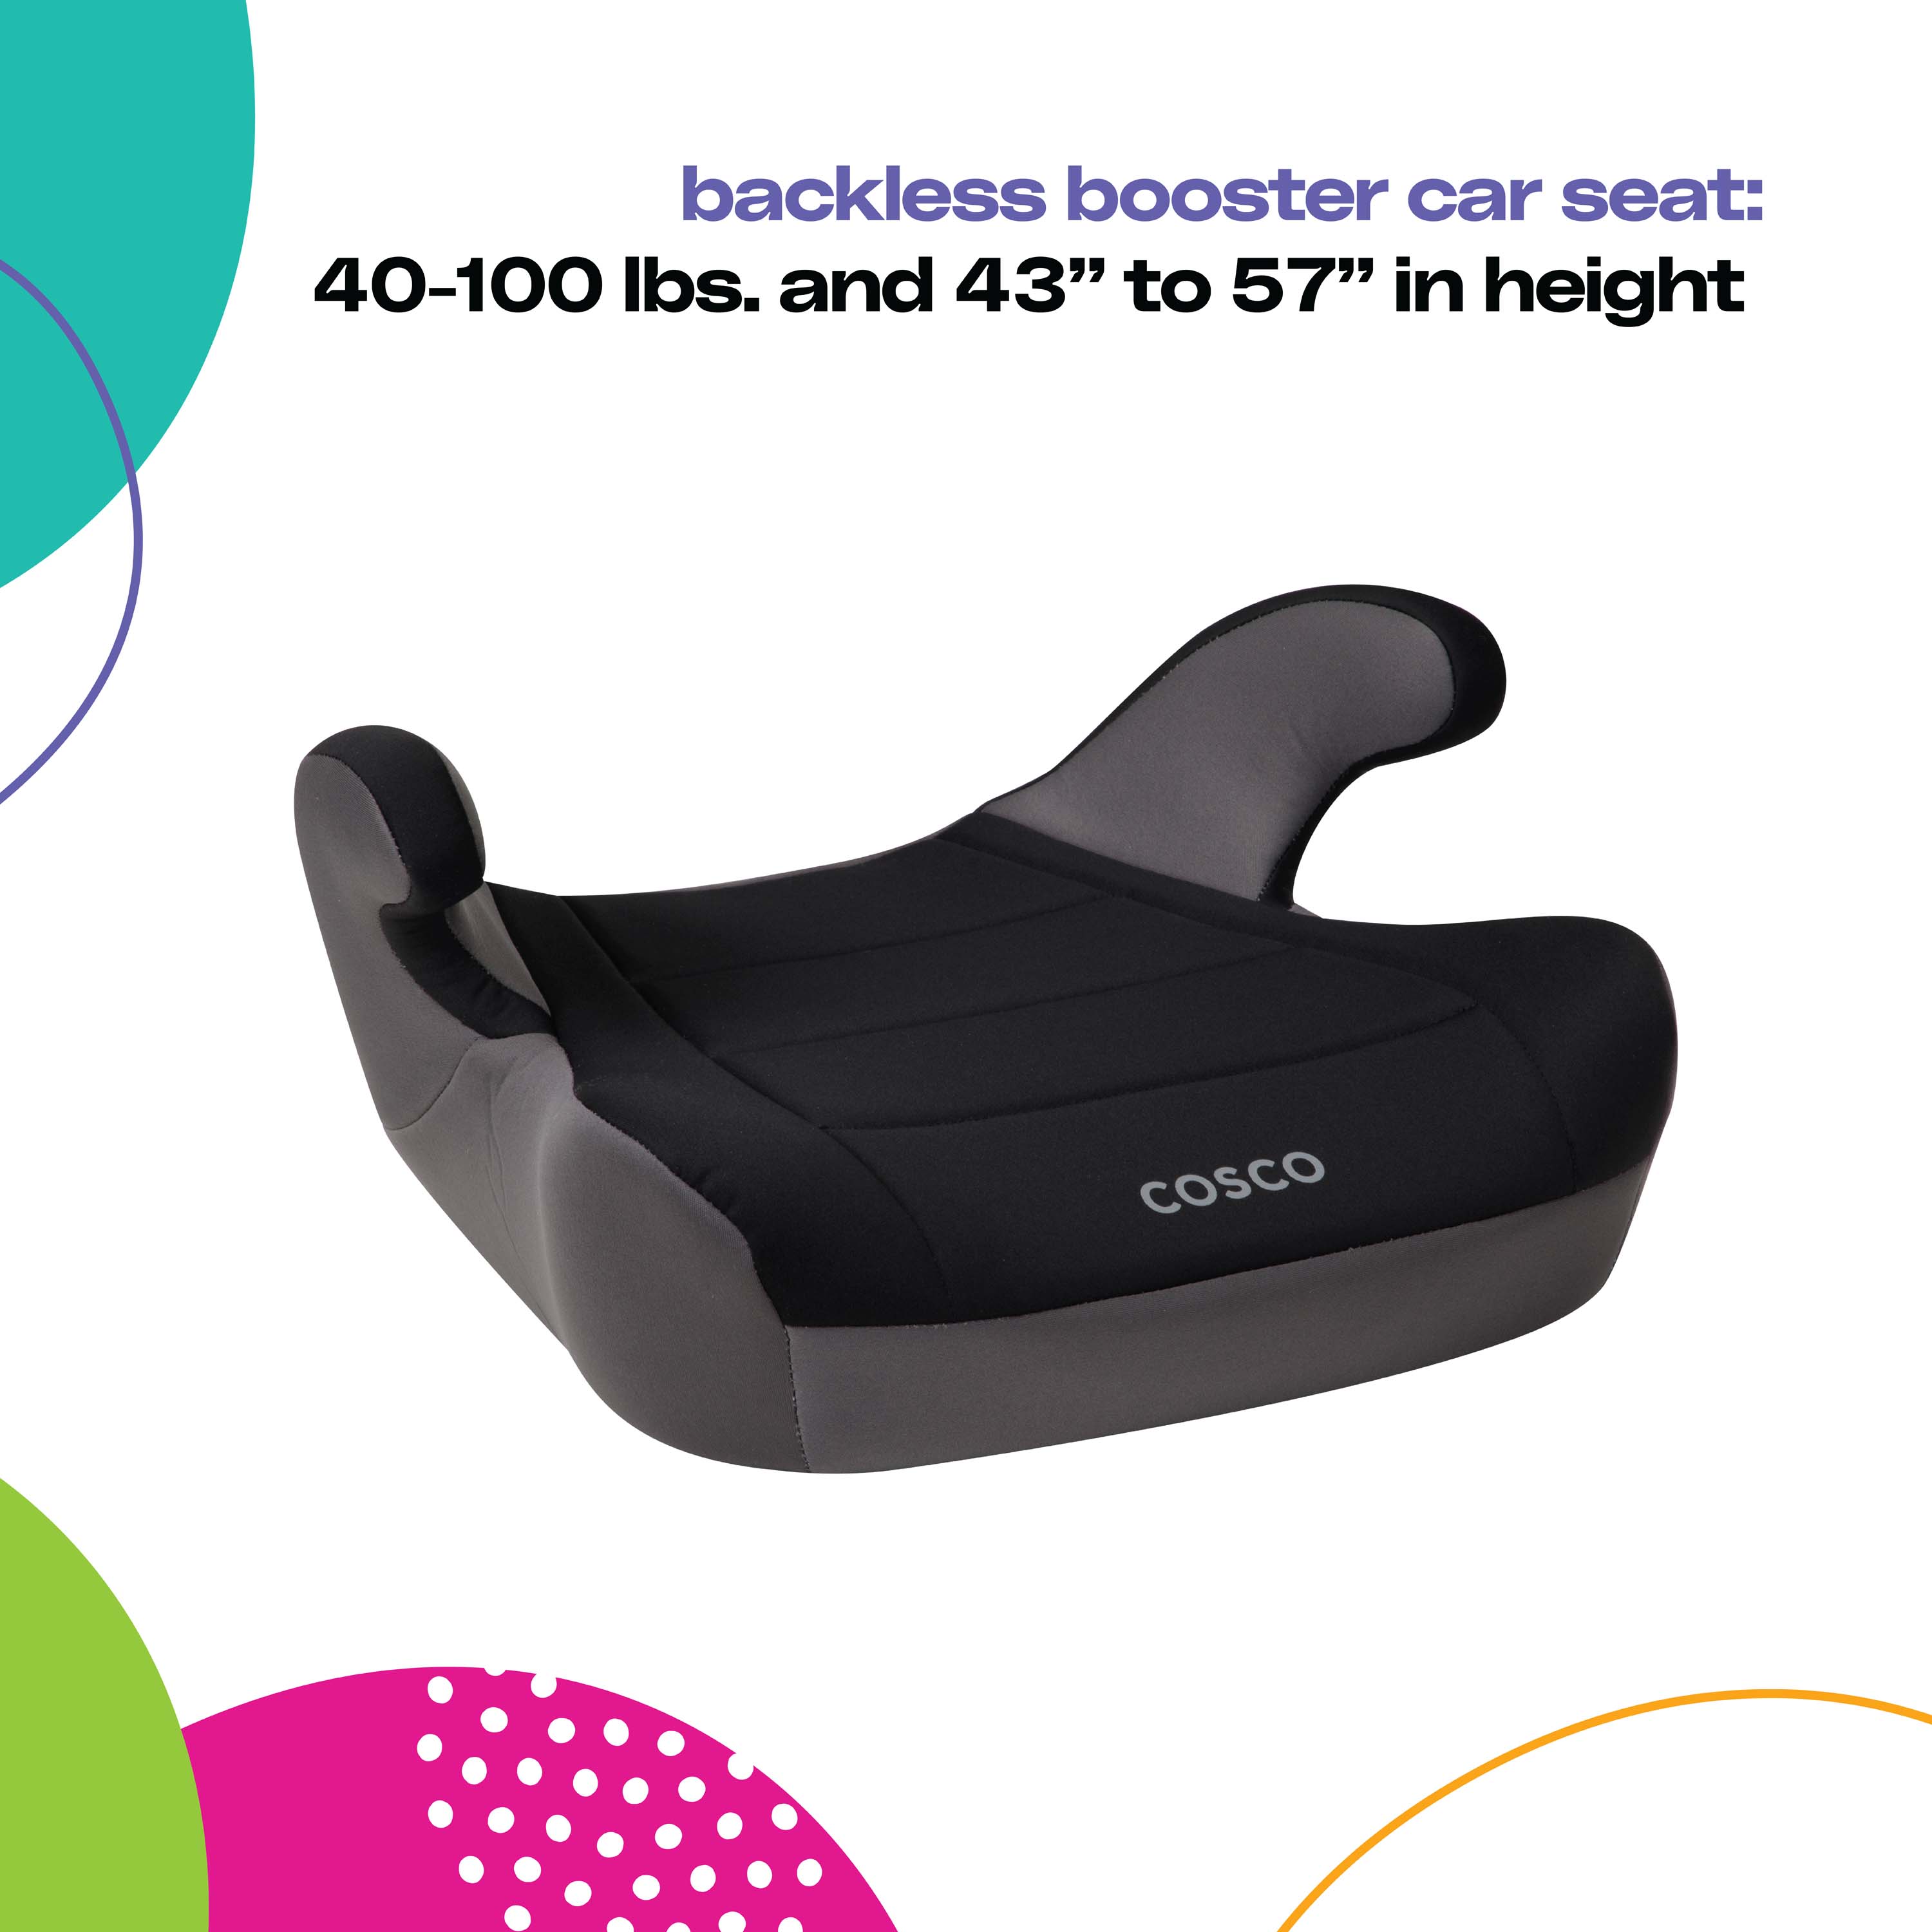 Cosco Kids Rise LX Booster Car Seat, Fossil Black - image 4 of 14